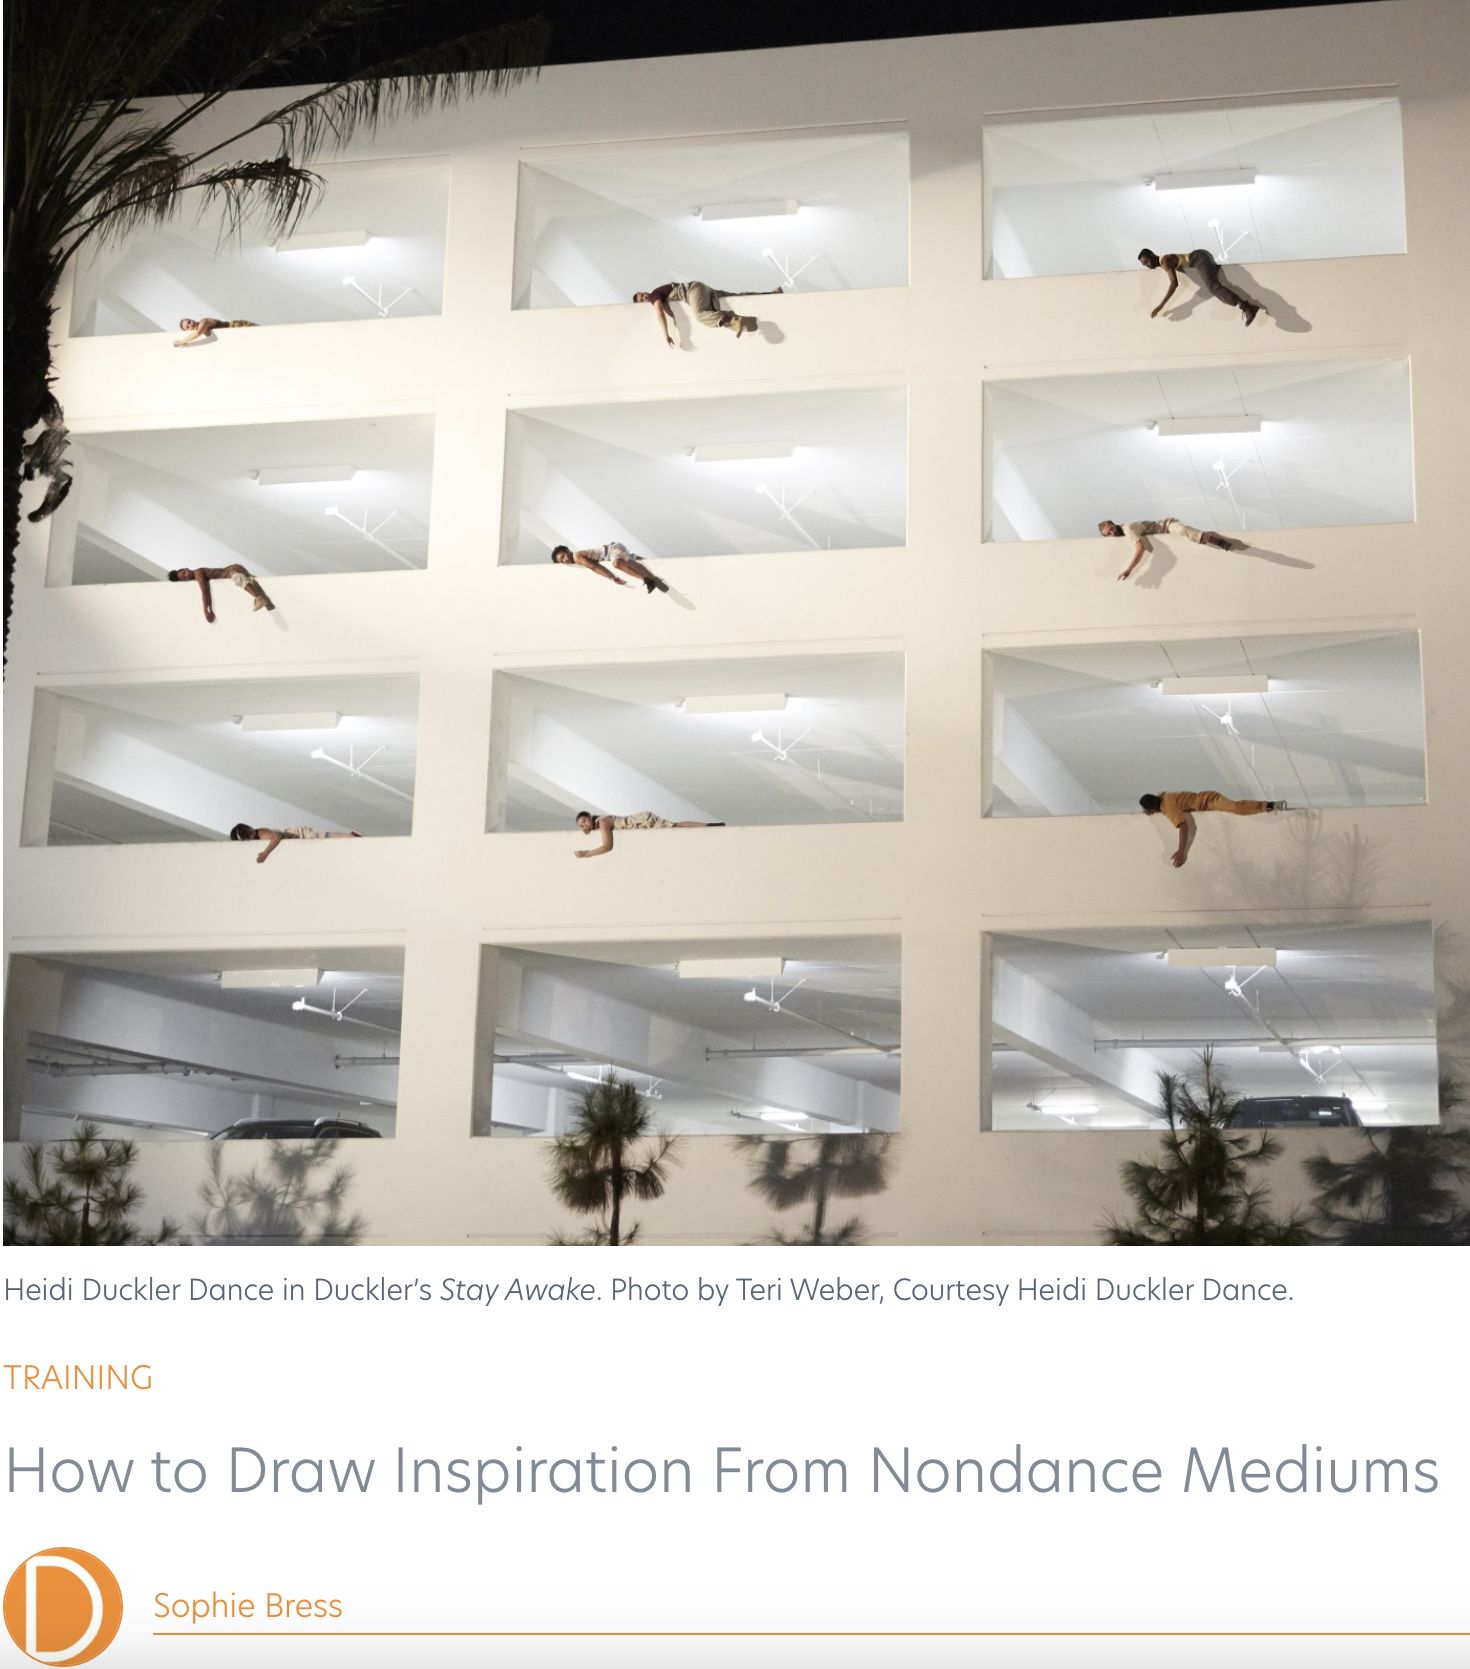 Heidi Duckler Shares How She Draws Inspiration from Nondance Mediums with Dance Magazine